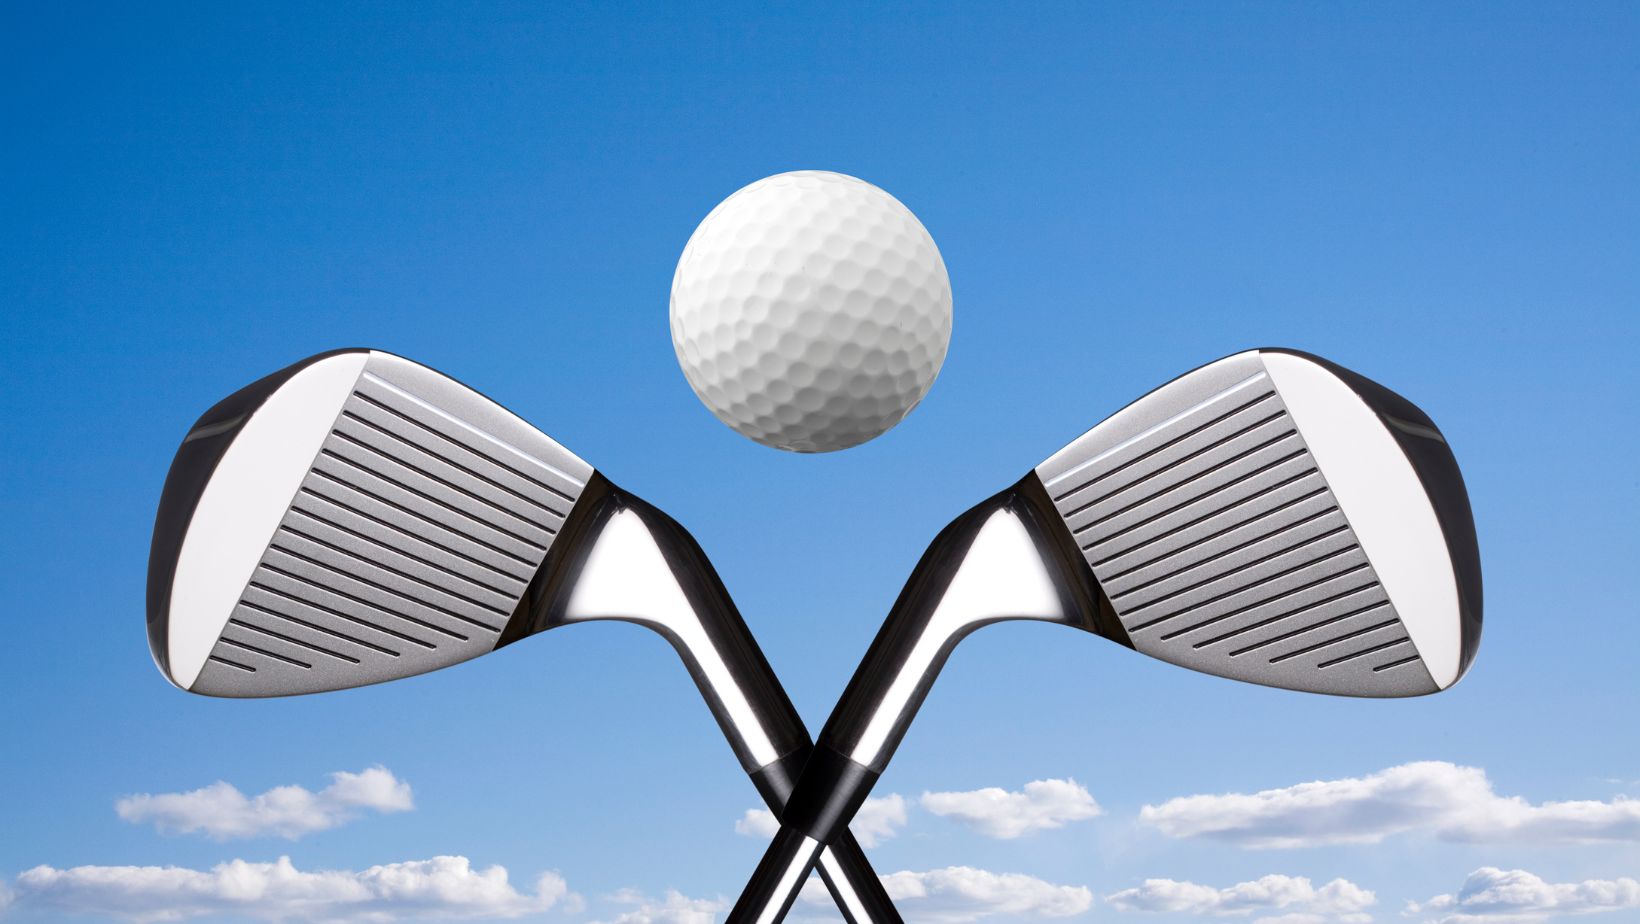 Golf Simulator Technology: What You Need to Know